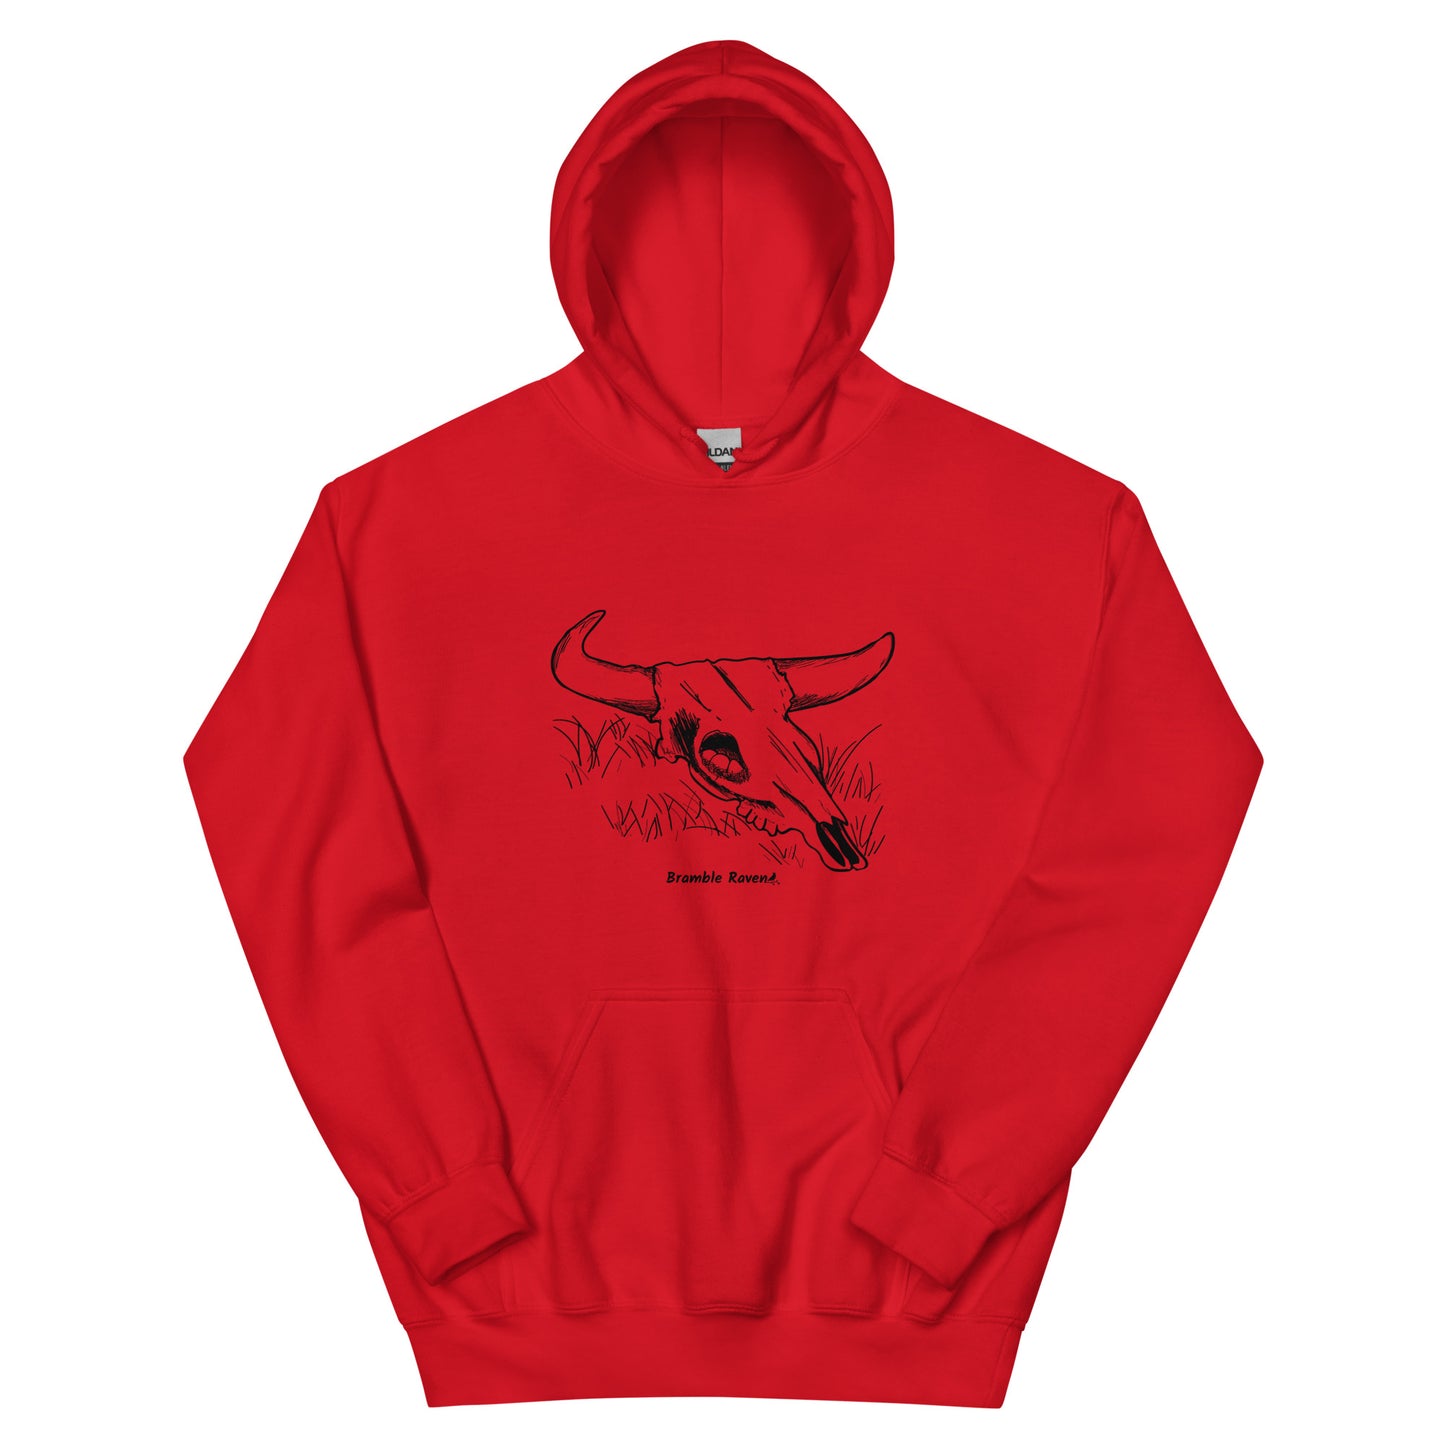 Red colored unisex hoodie. Front has image of a cow skull cradling a bird nest. Features double-lined hood and front pouch pocket.